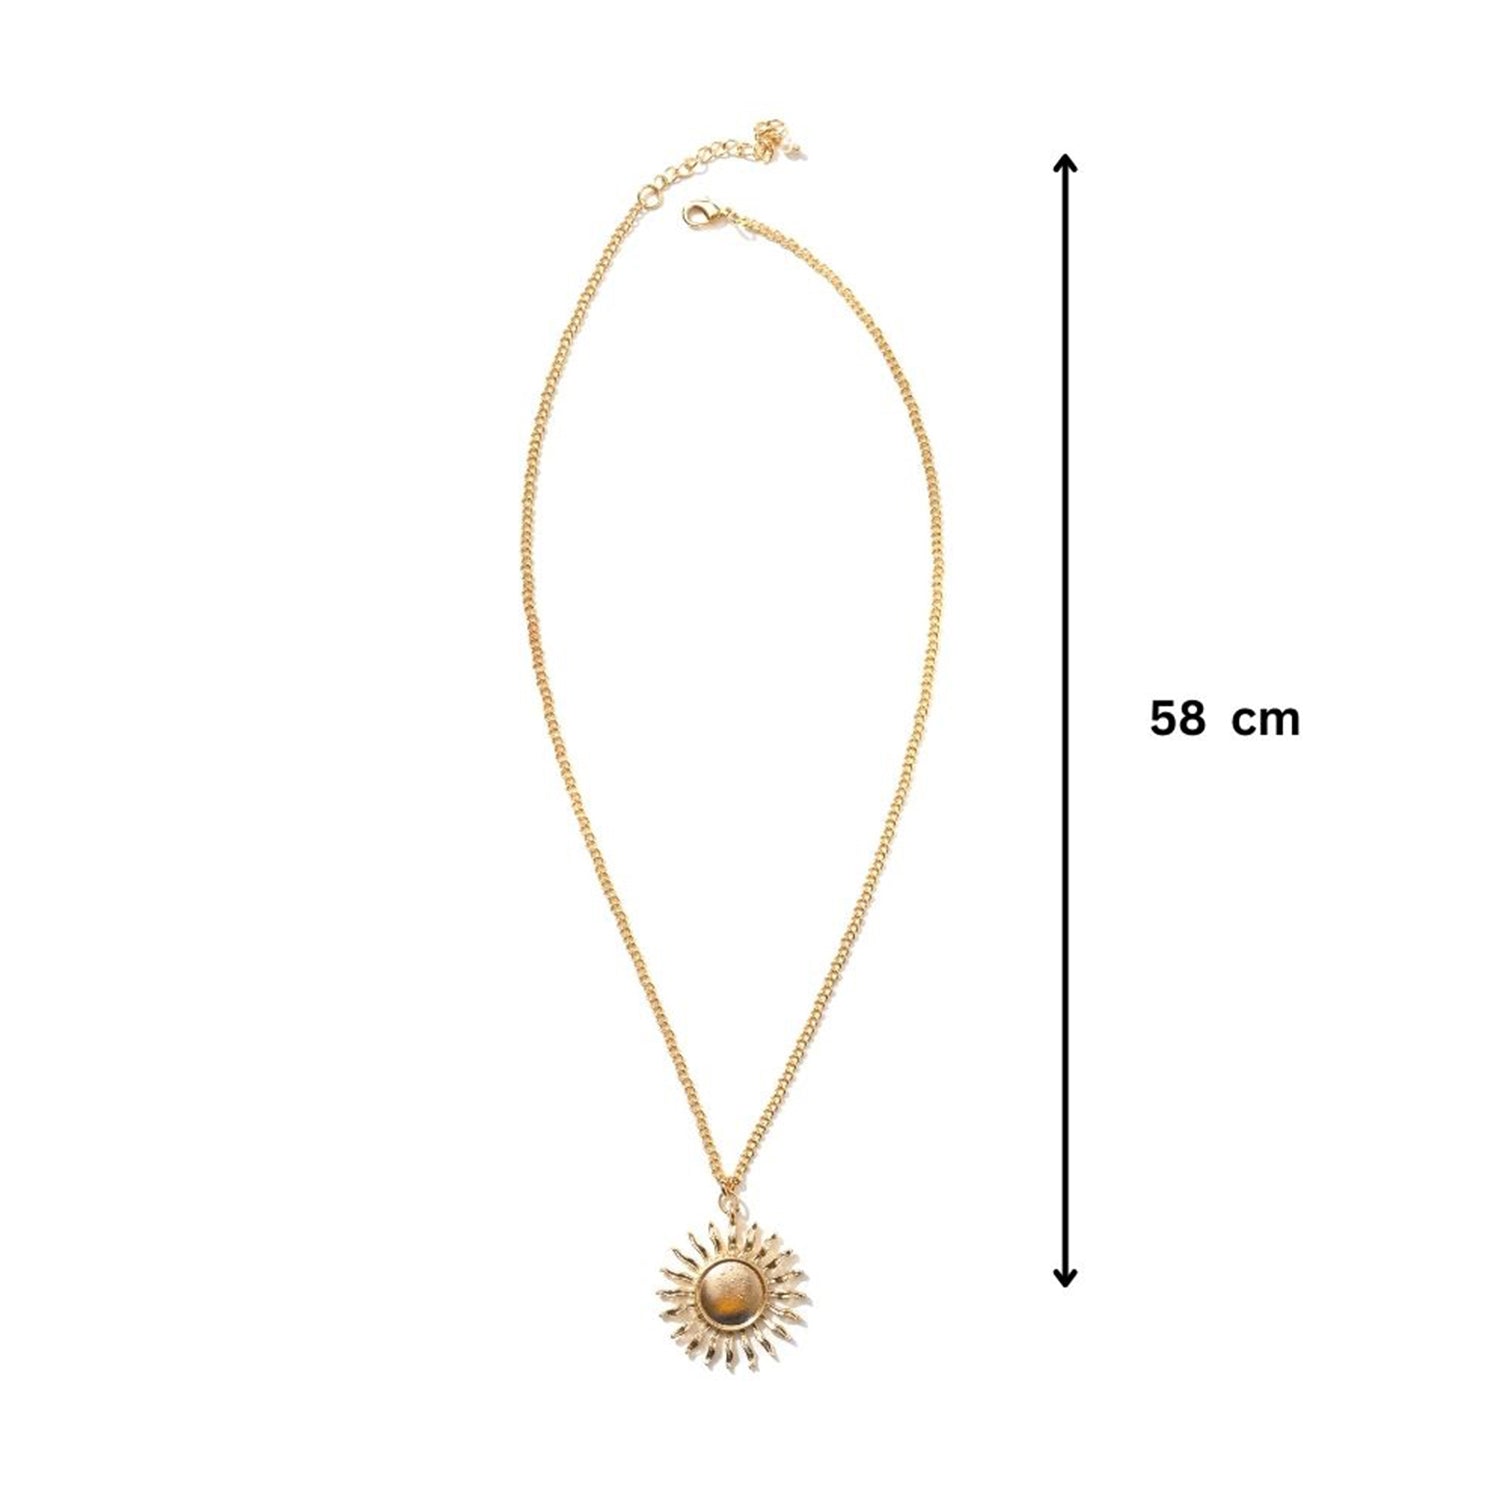 Small Sun Yellow Gold Necklace - Celine Daoust - Celine Daoust